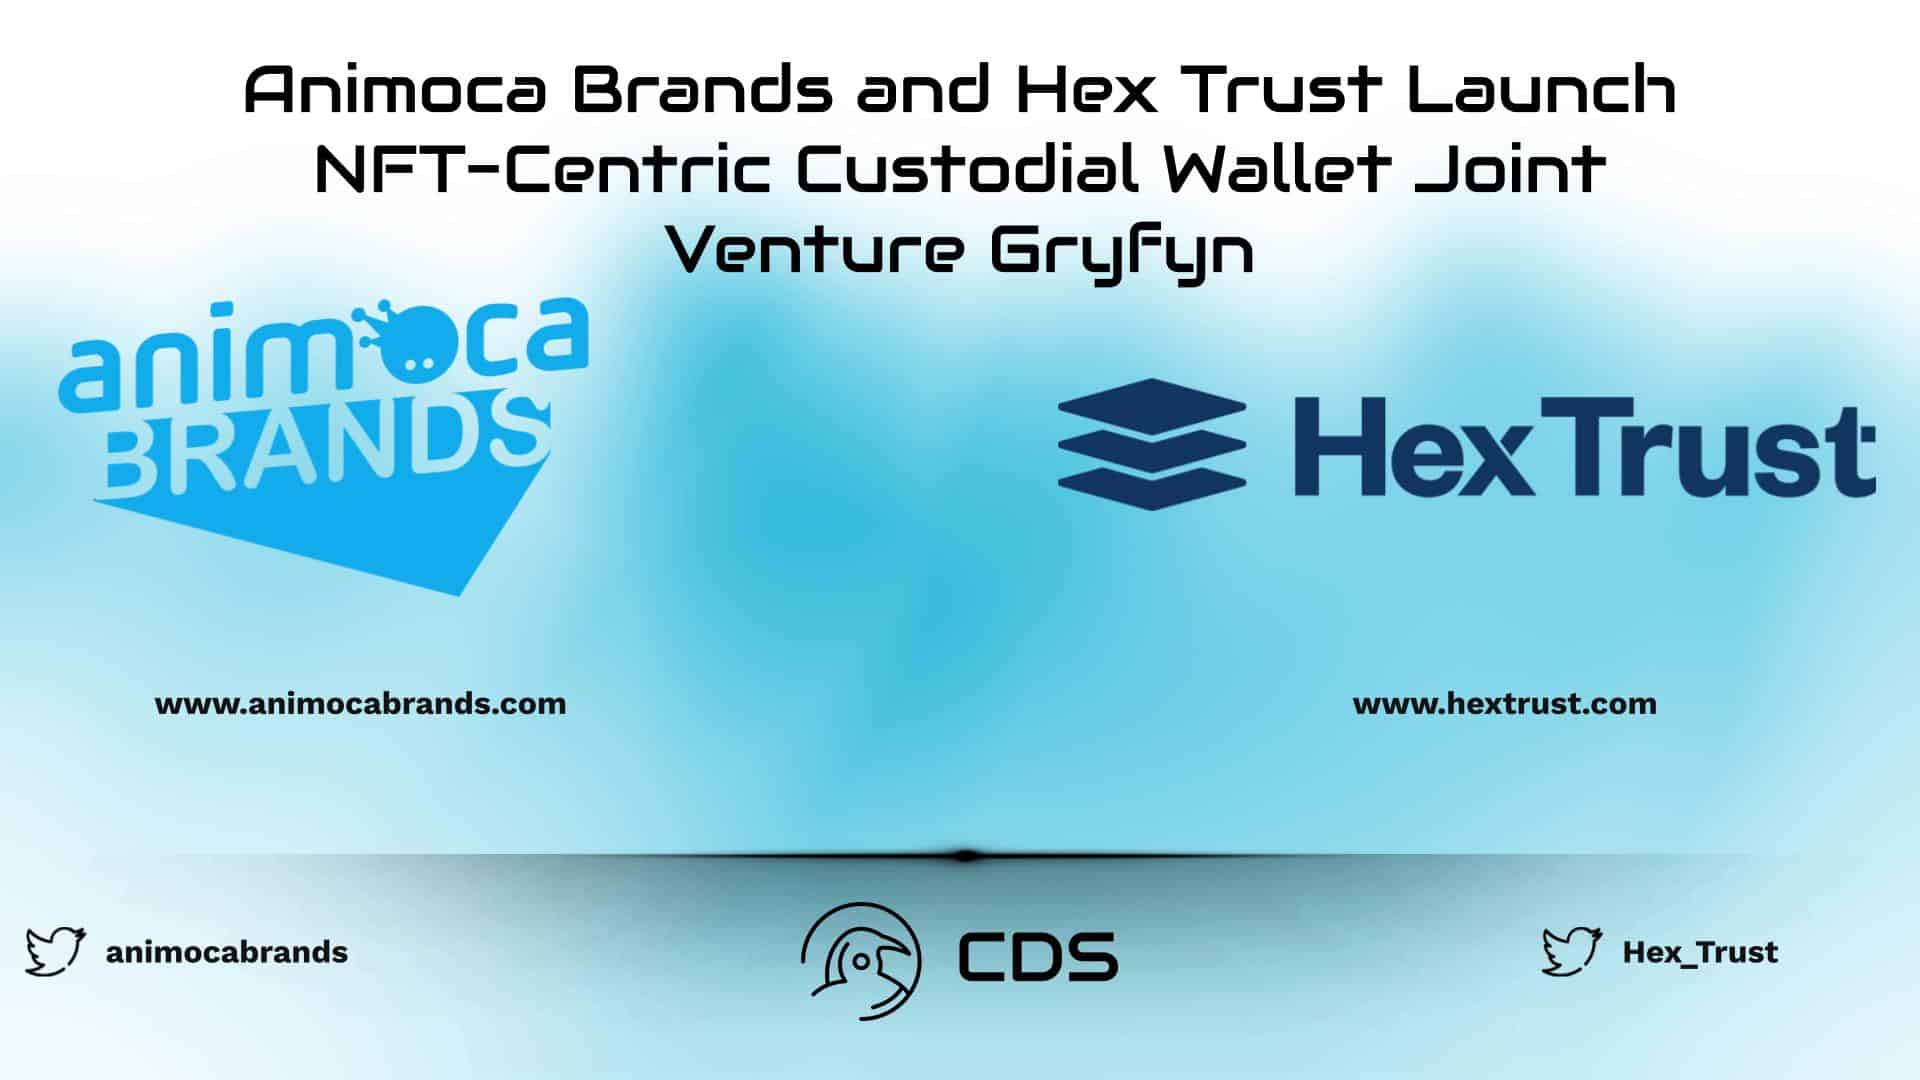 Animoca Brands and Hex Trust Launch NFT-Centric Custodial Wallet Joint Venture Gryfyn